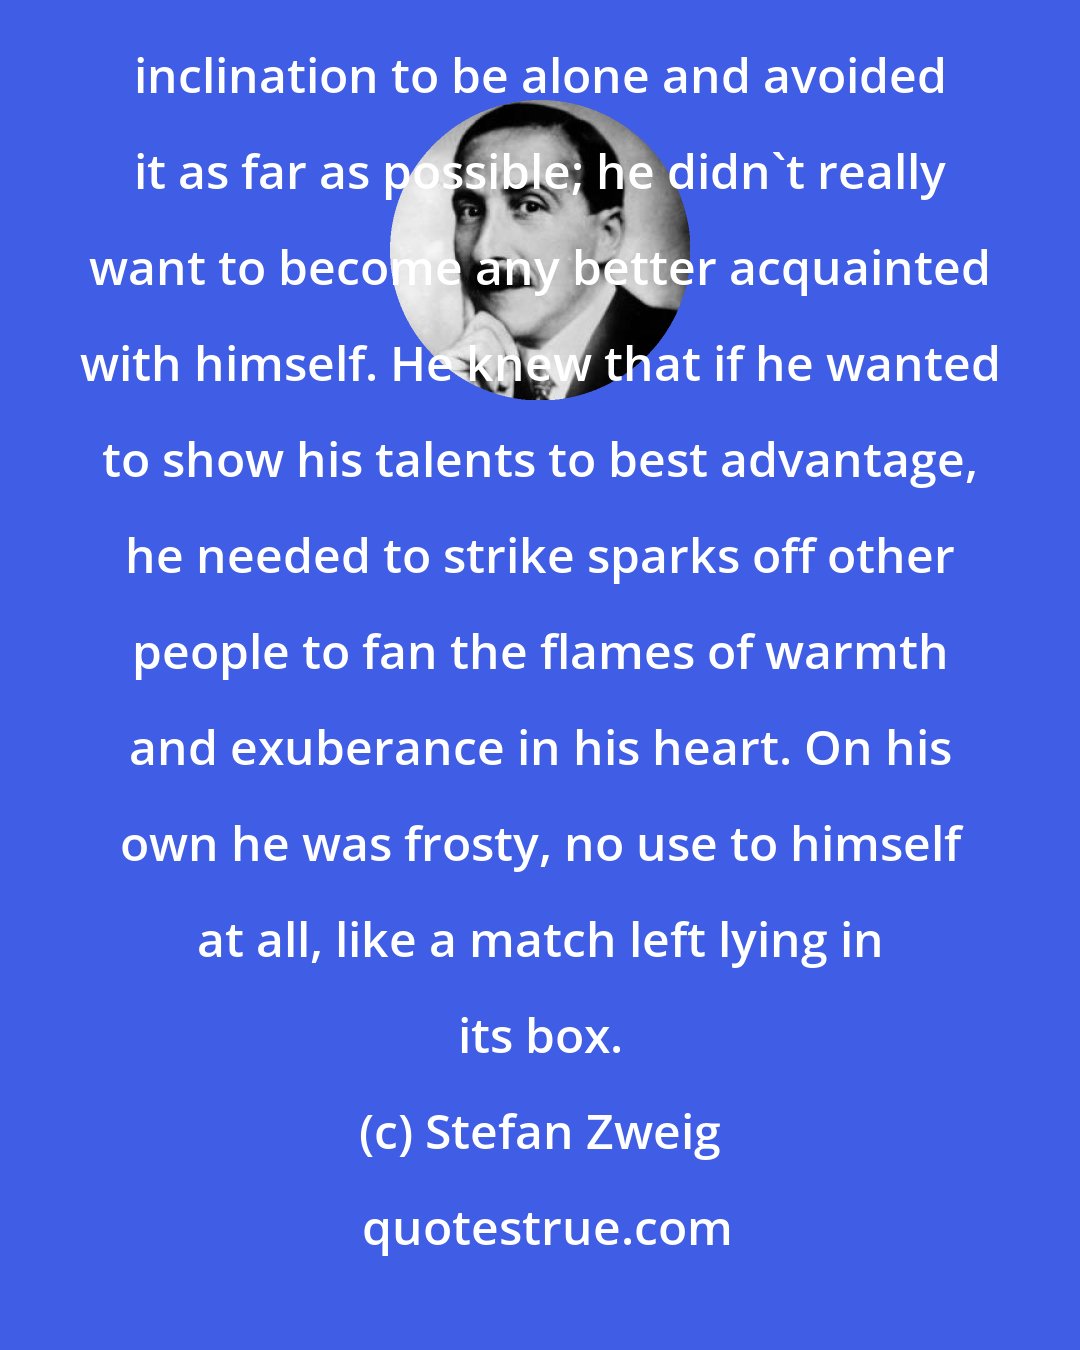 Stefan Zweig: He was welcome everywhere he went, and was well-aware of his inability to tolerate solitude. He felt no inclination to be alone and avoided it as far as possible; he didn't really want to become any better acquainted with himself. He knew that if he wanted to show his talents to best advantage, he needed to strike sparks off other people to fan the flames of warmth and exuberance in his heart. On his own he was frosty, no use to himself at all, like a match left lying in its box.